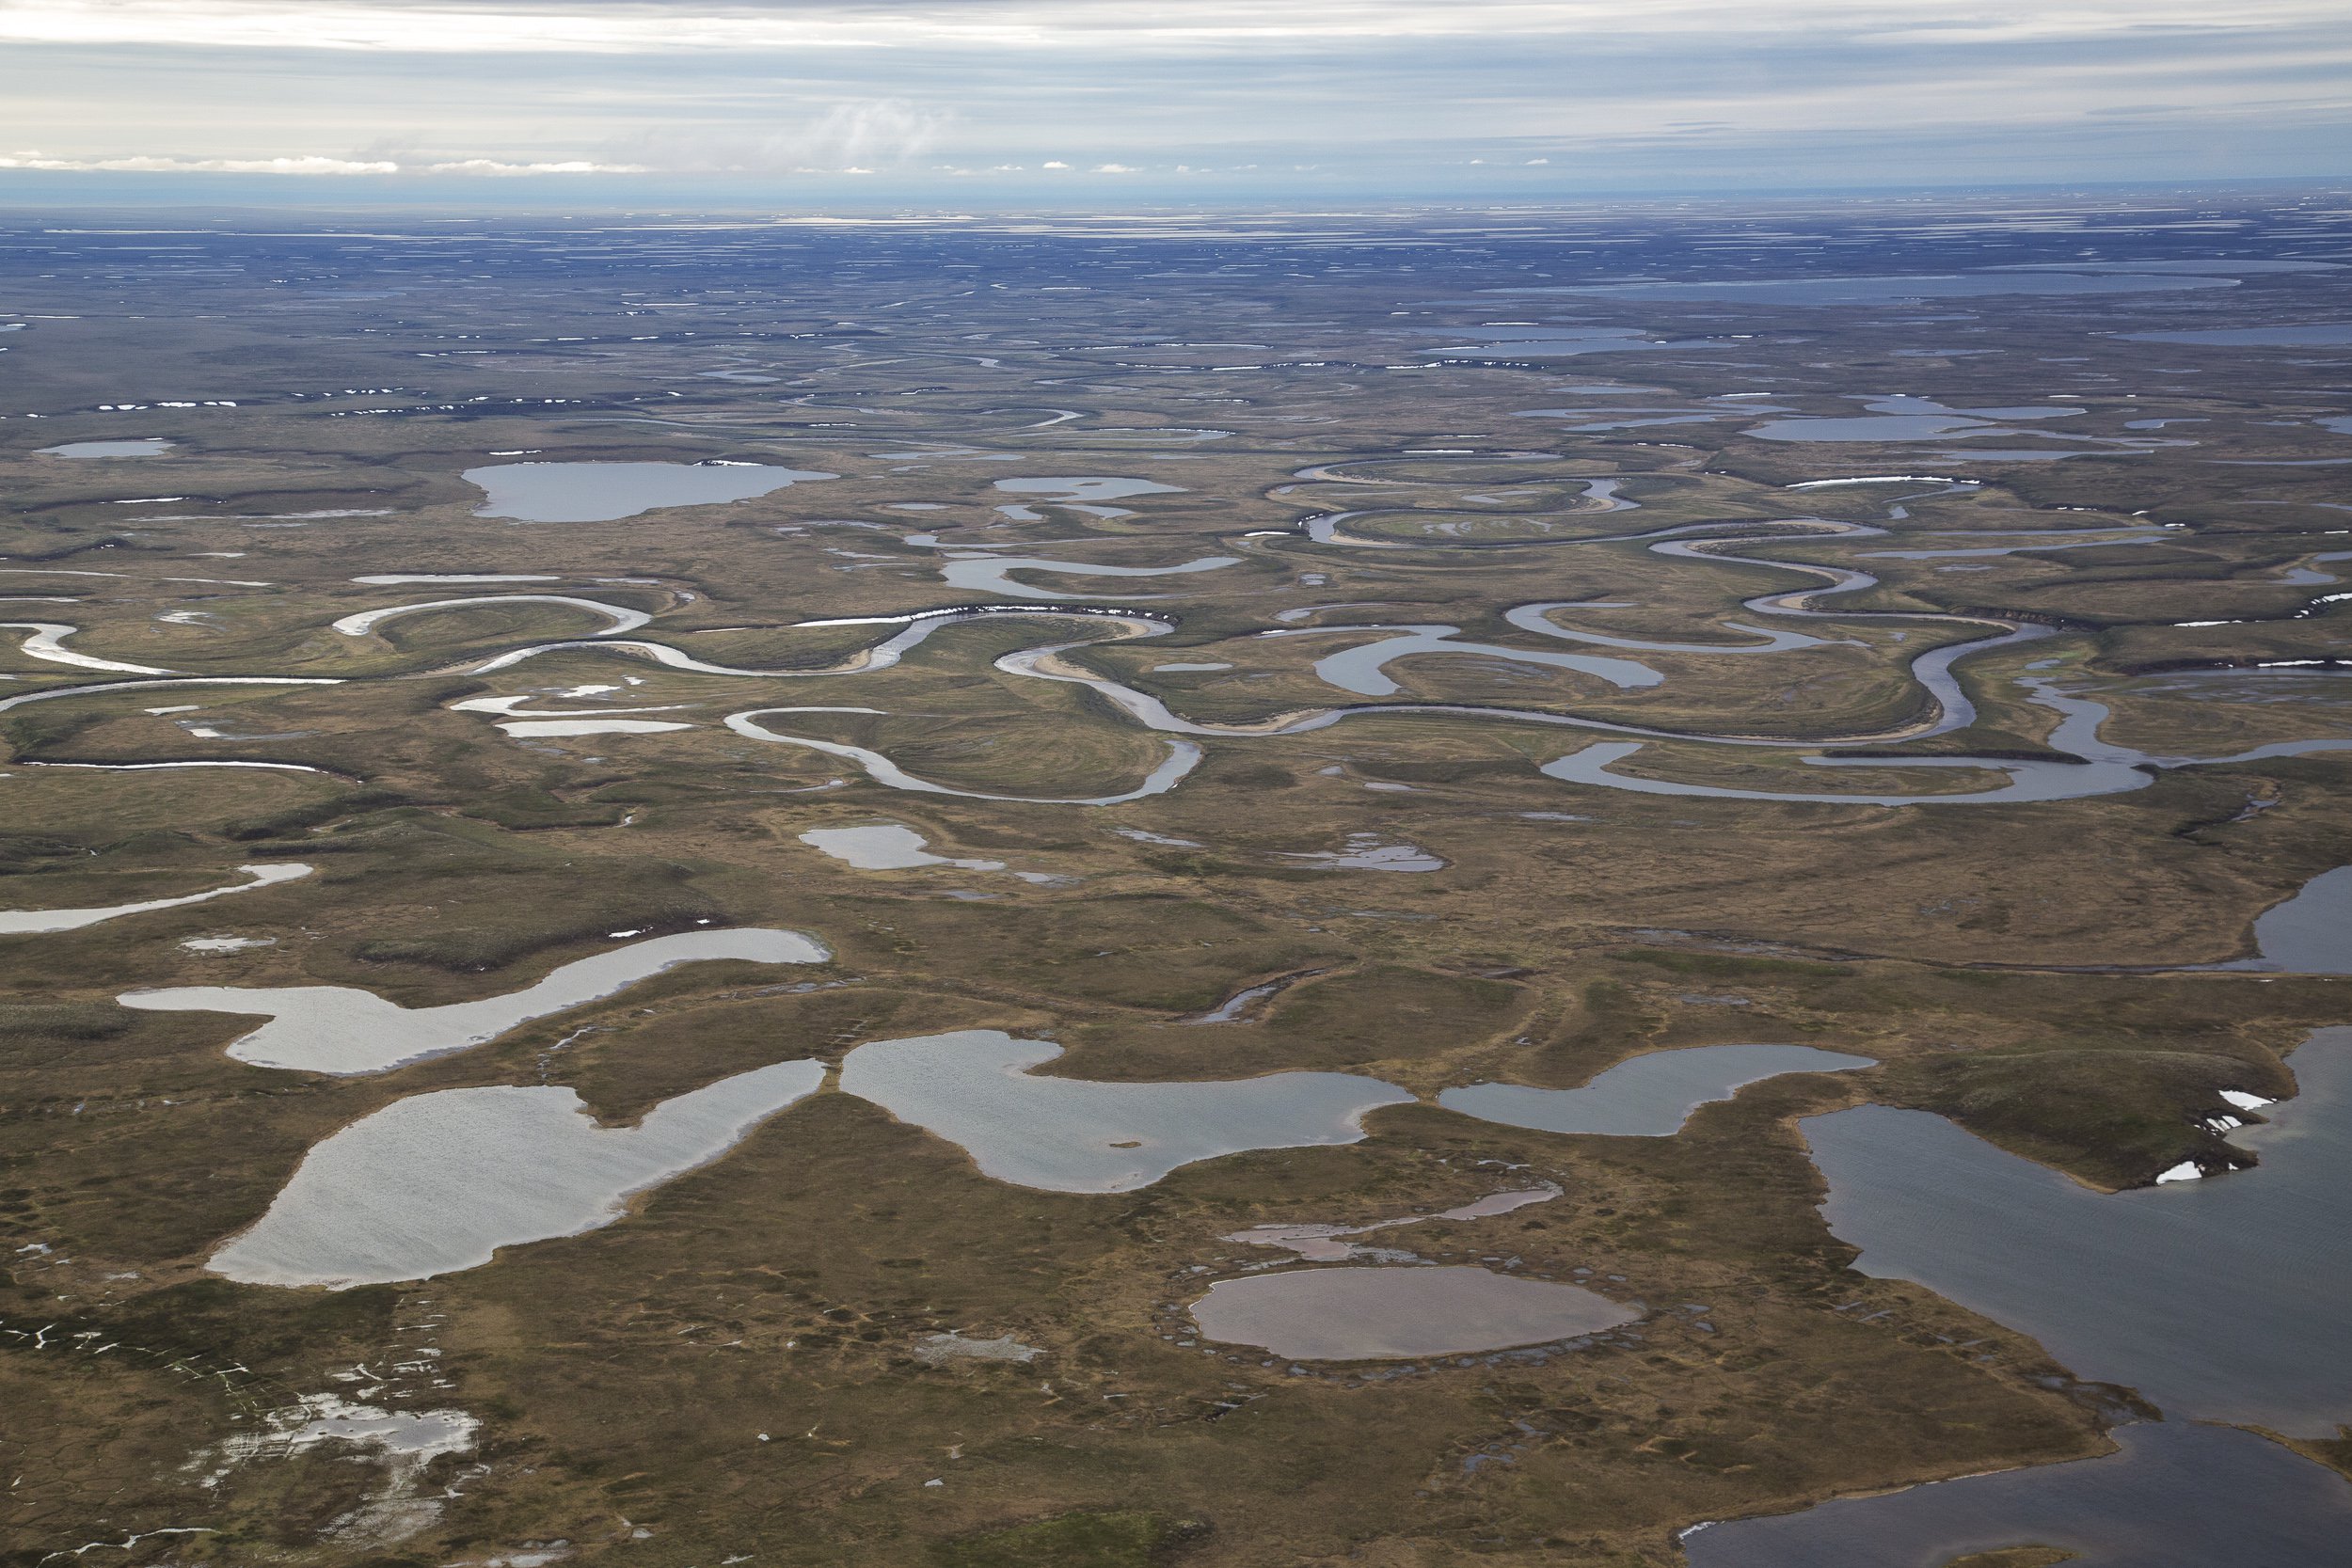 Lakes and winding rivers characterize the landscape of the National Petroleum Reserve—Alaska (NPRA) shown in this image from June 26, 2014, taken as a part of the Bureau of Land Management’s “My Public Lands Roadtrip.”